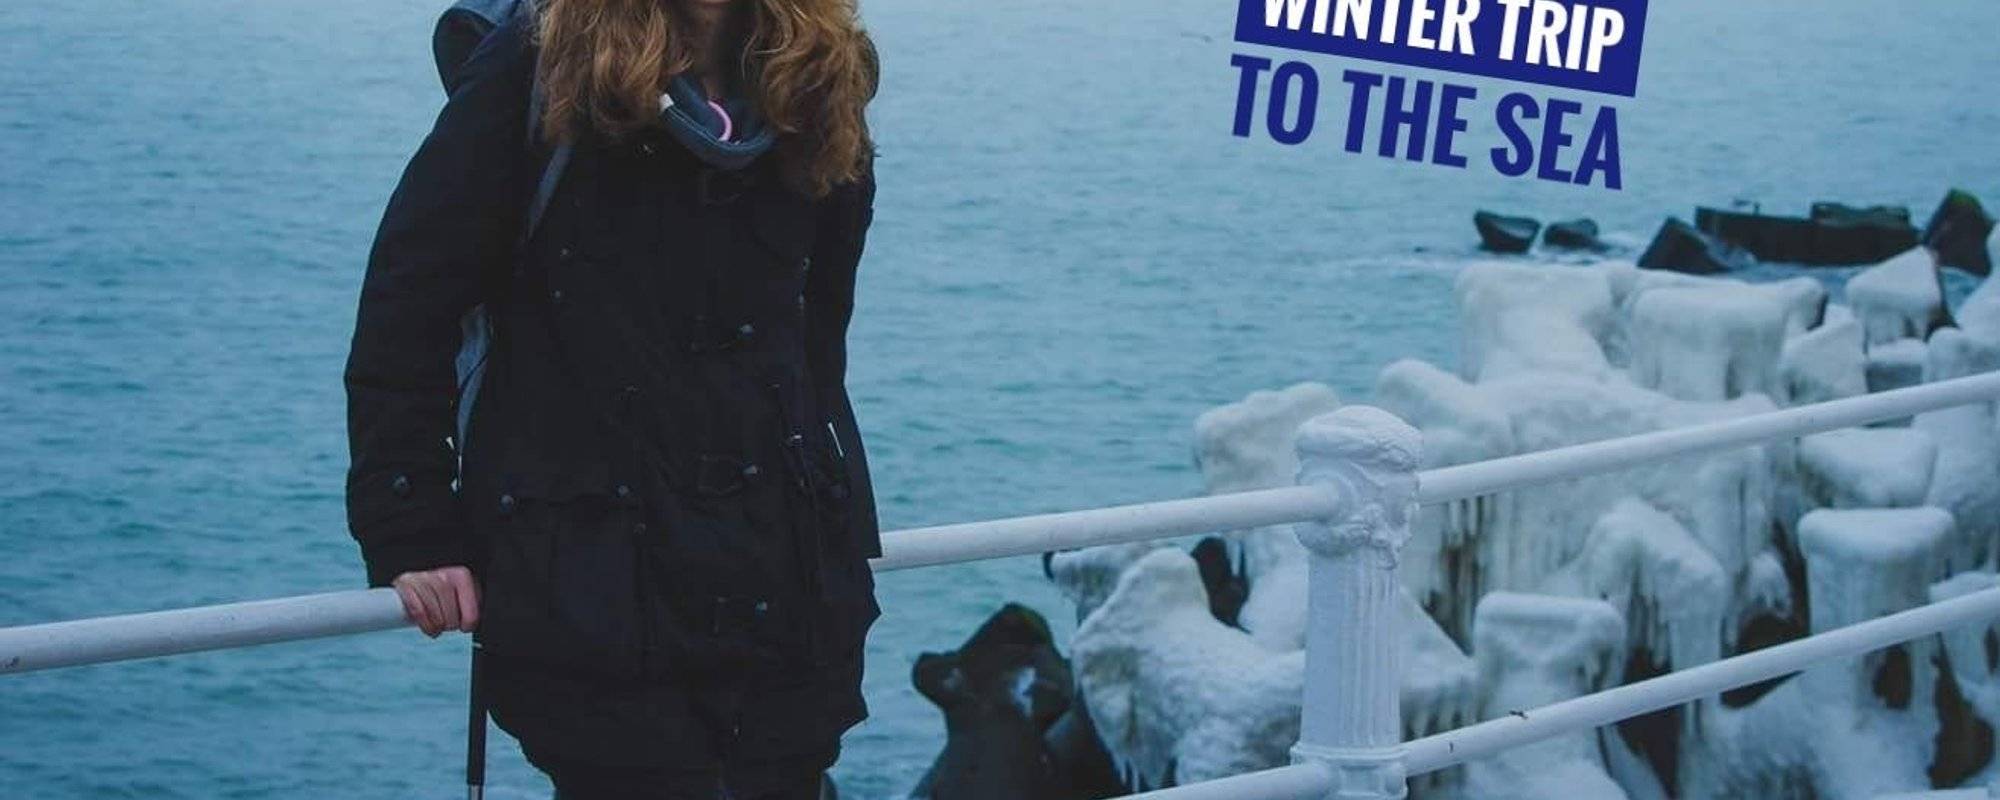 Let's travel together #63 - Winter Trip To The Sea (Constanta, Romania)